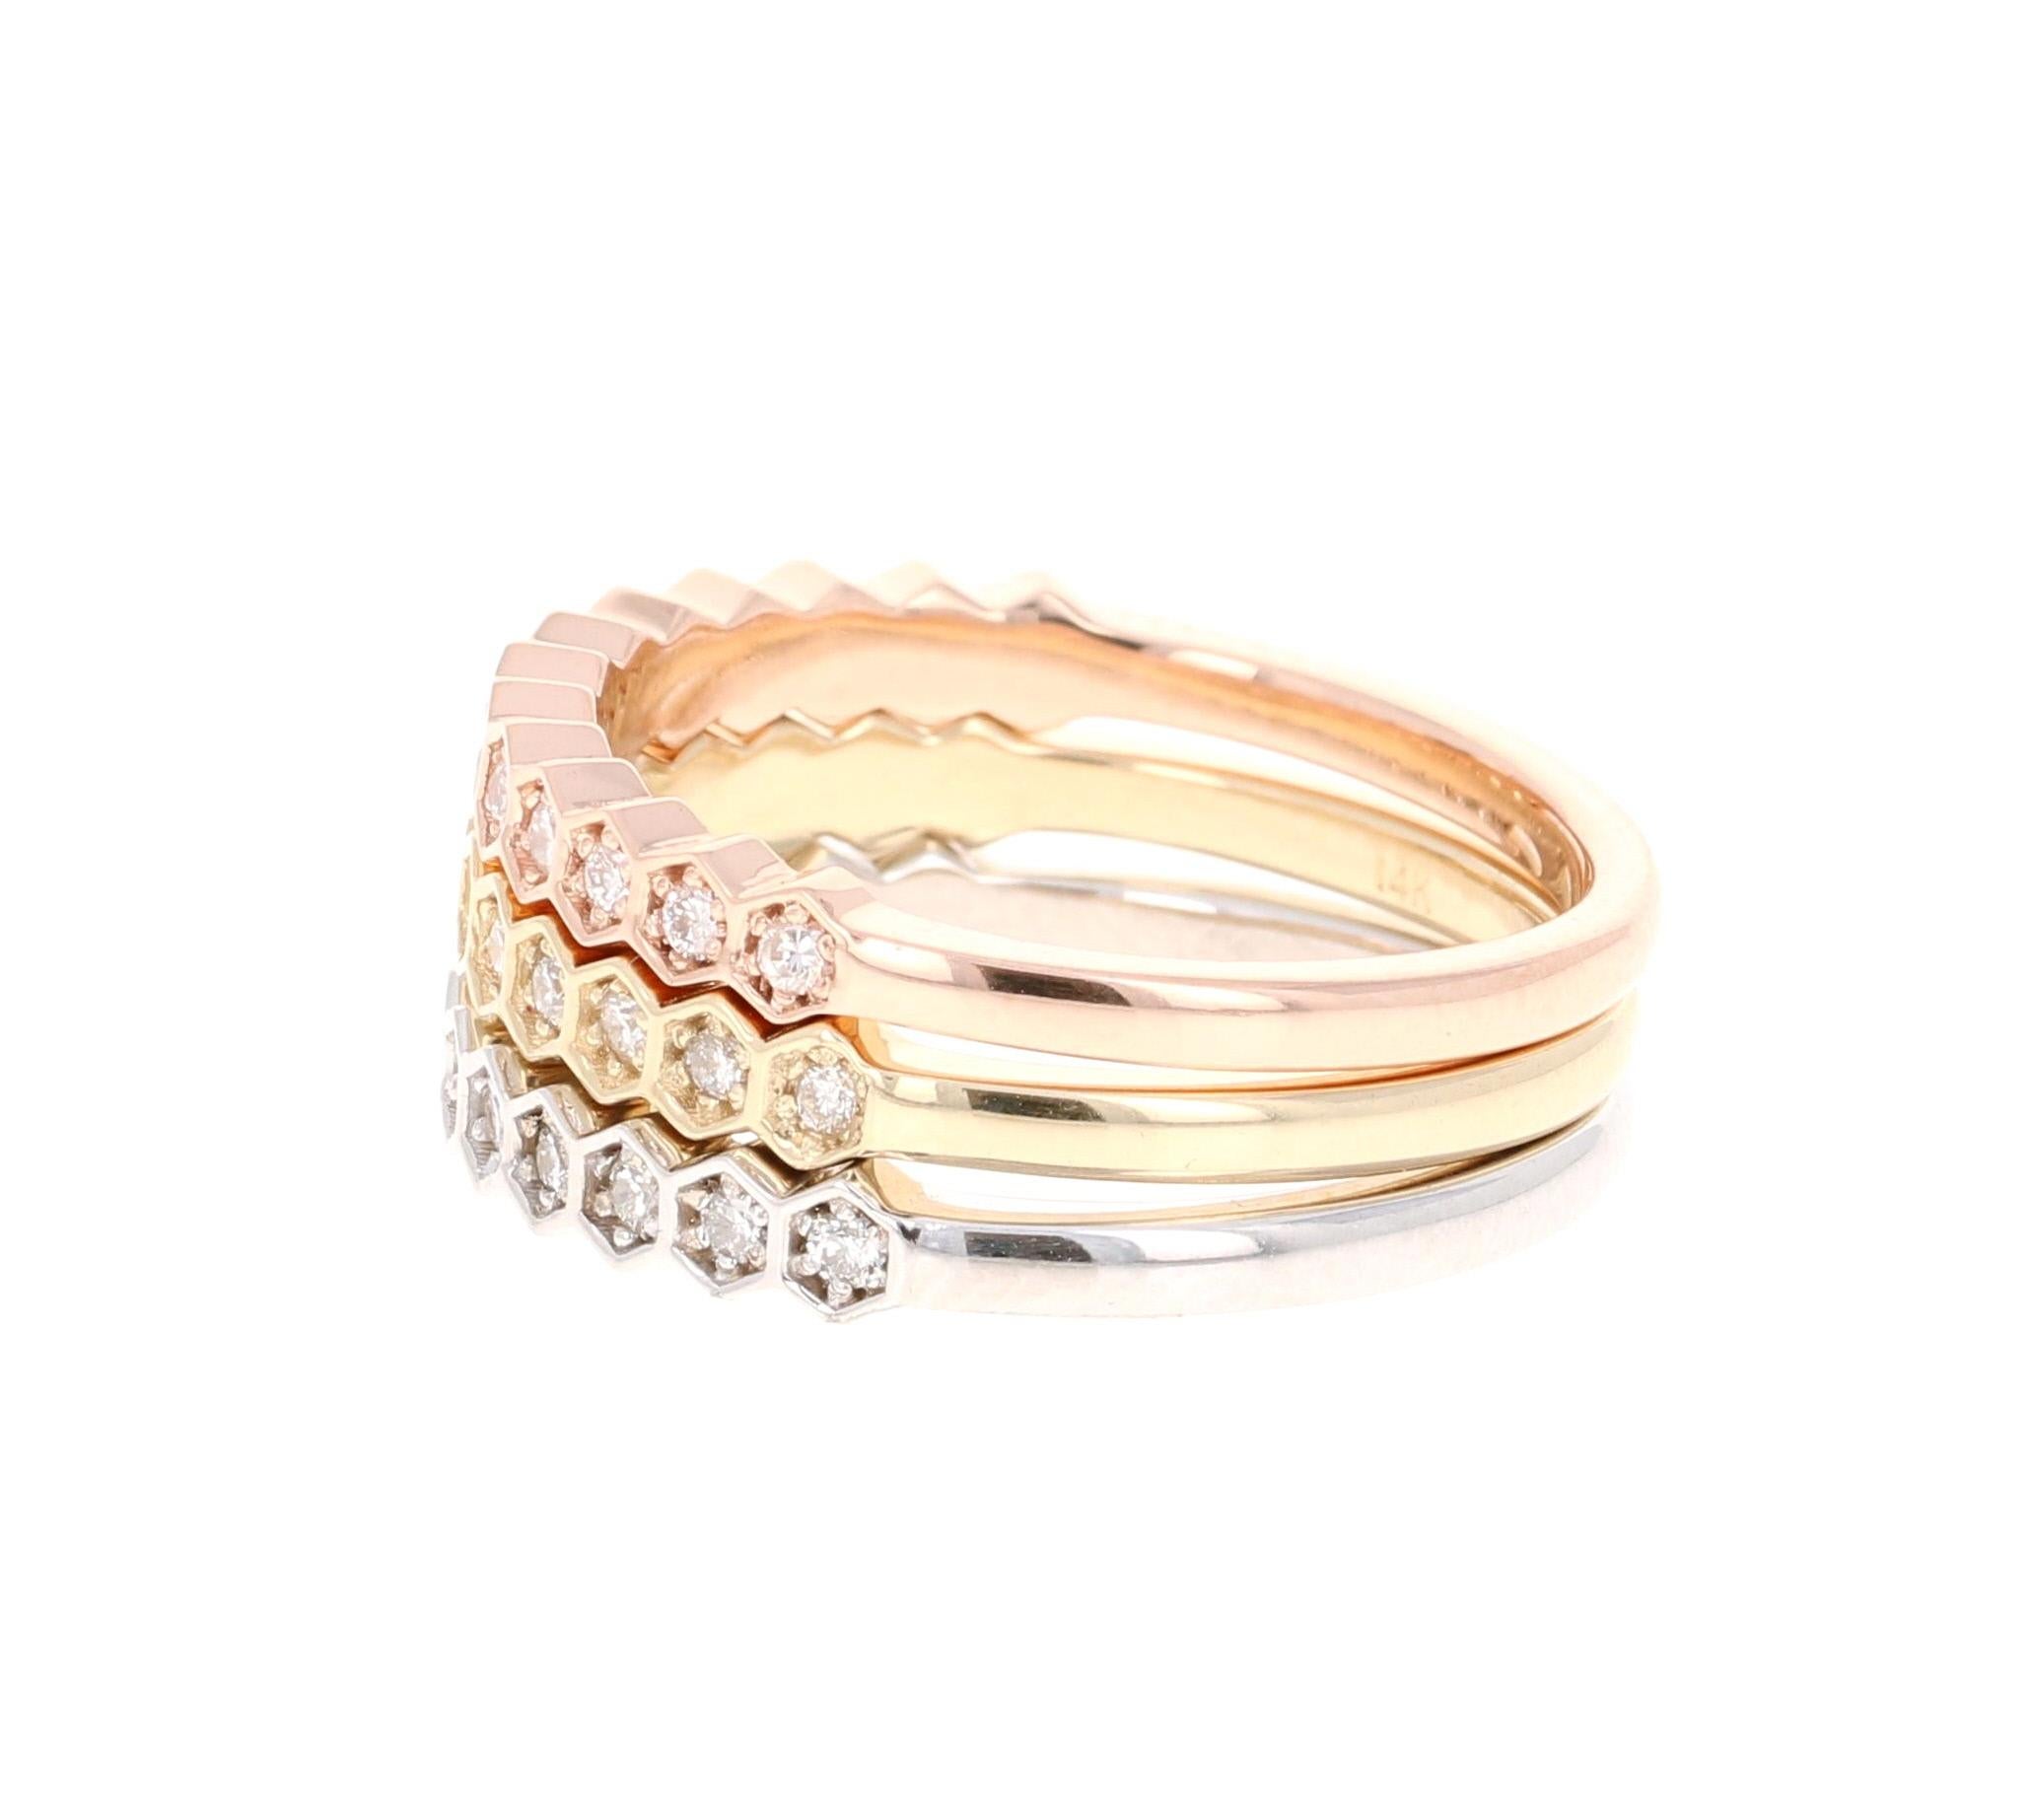 Contemporary 0.47 Carat Round Cut Diamond White, Rose, Yellow Gold Stackable Bands